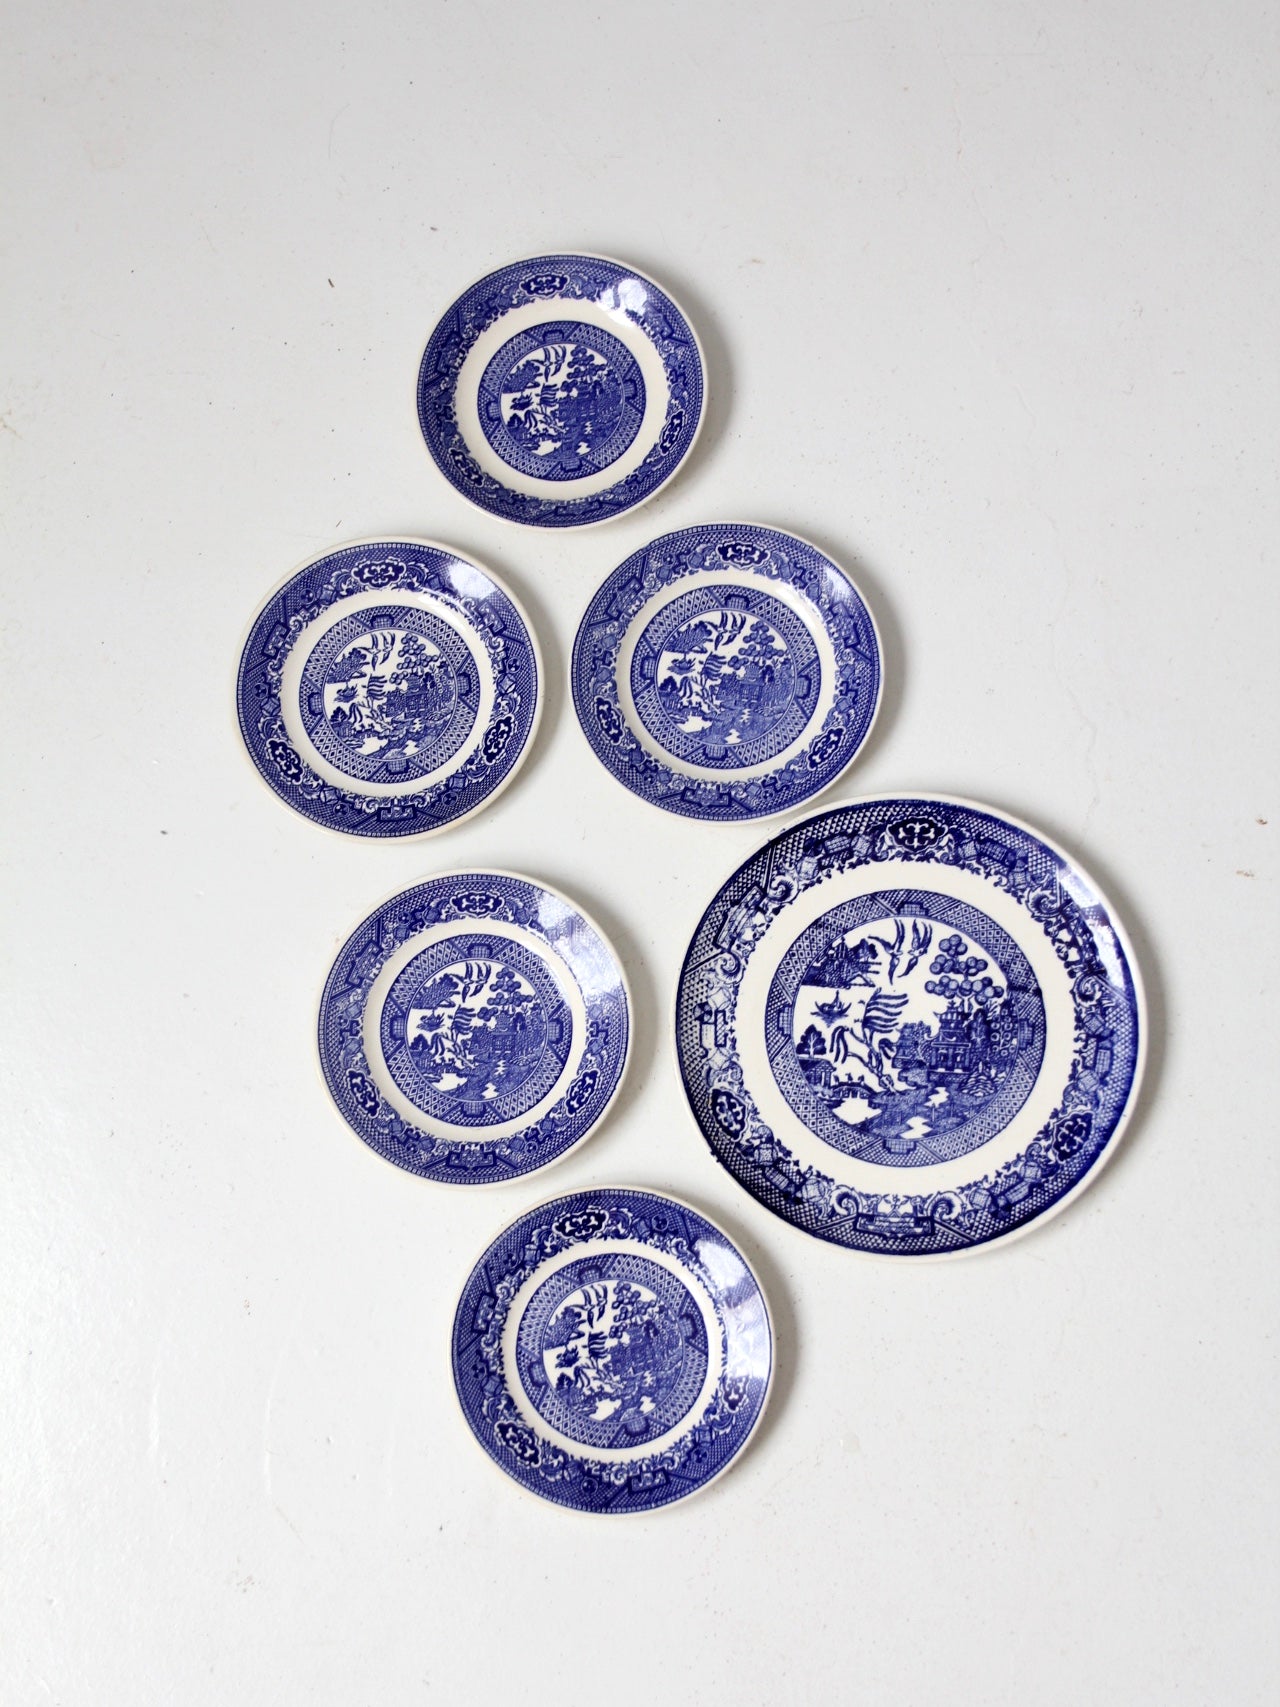 vintage Blue Willow plate collection 6pc